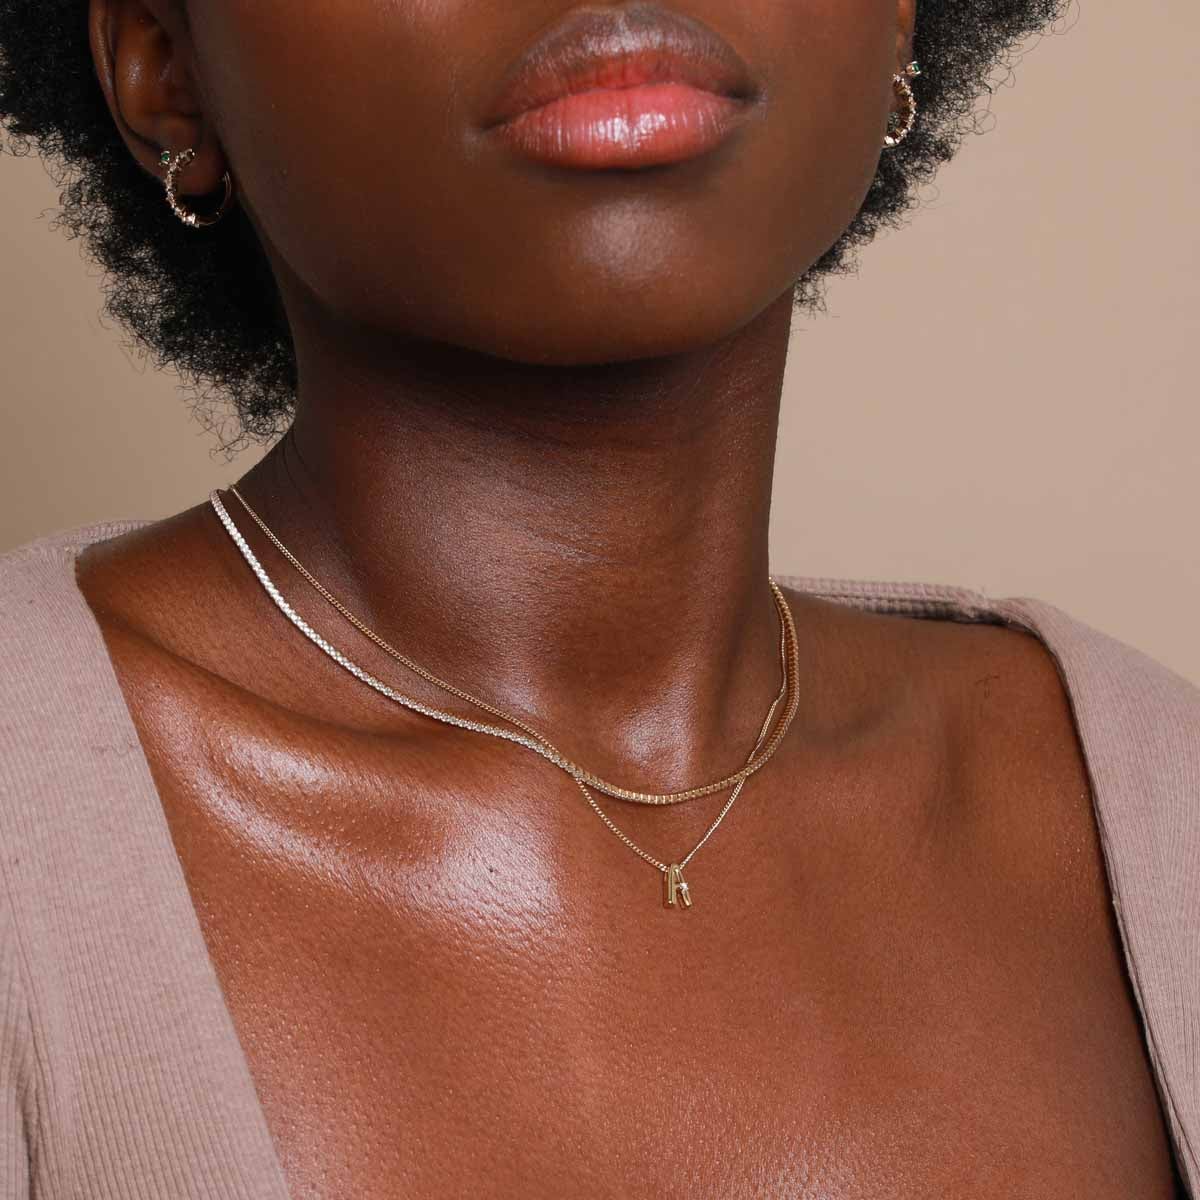 A Initial Pendant Necklace in Gold worn layered with snake chain necklace